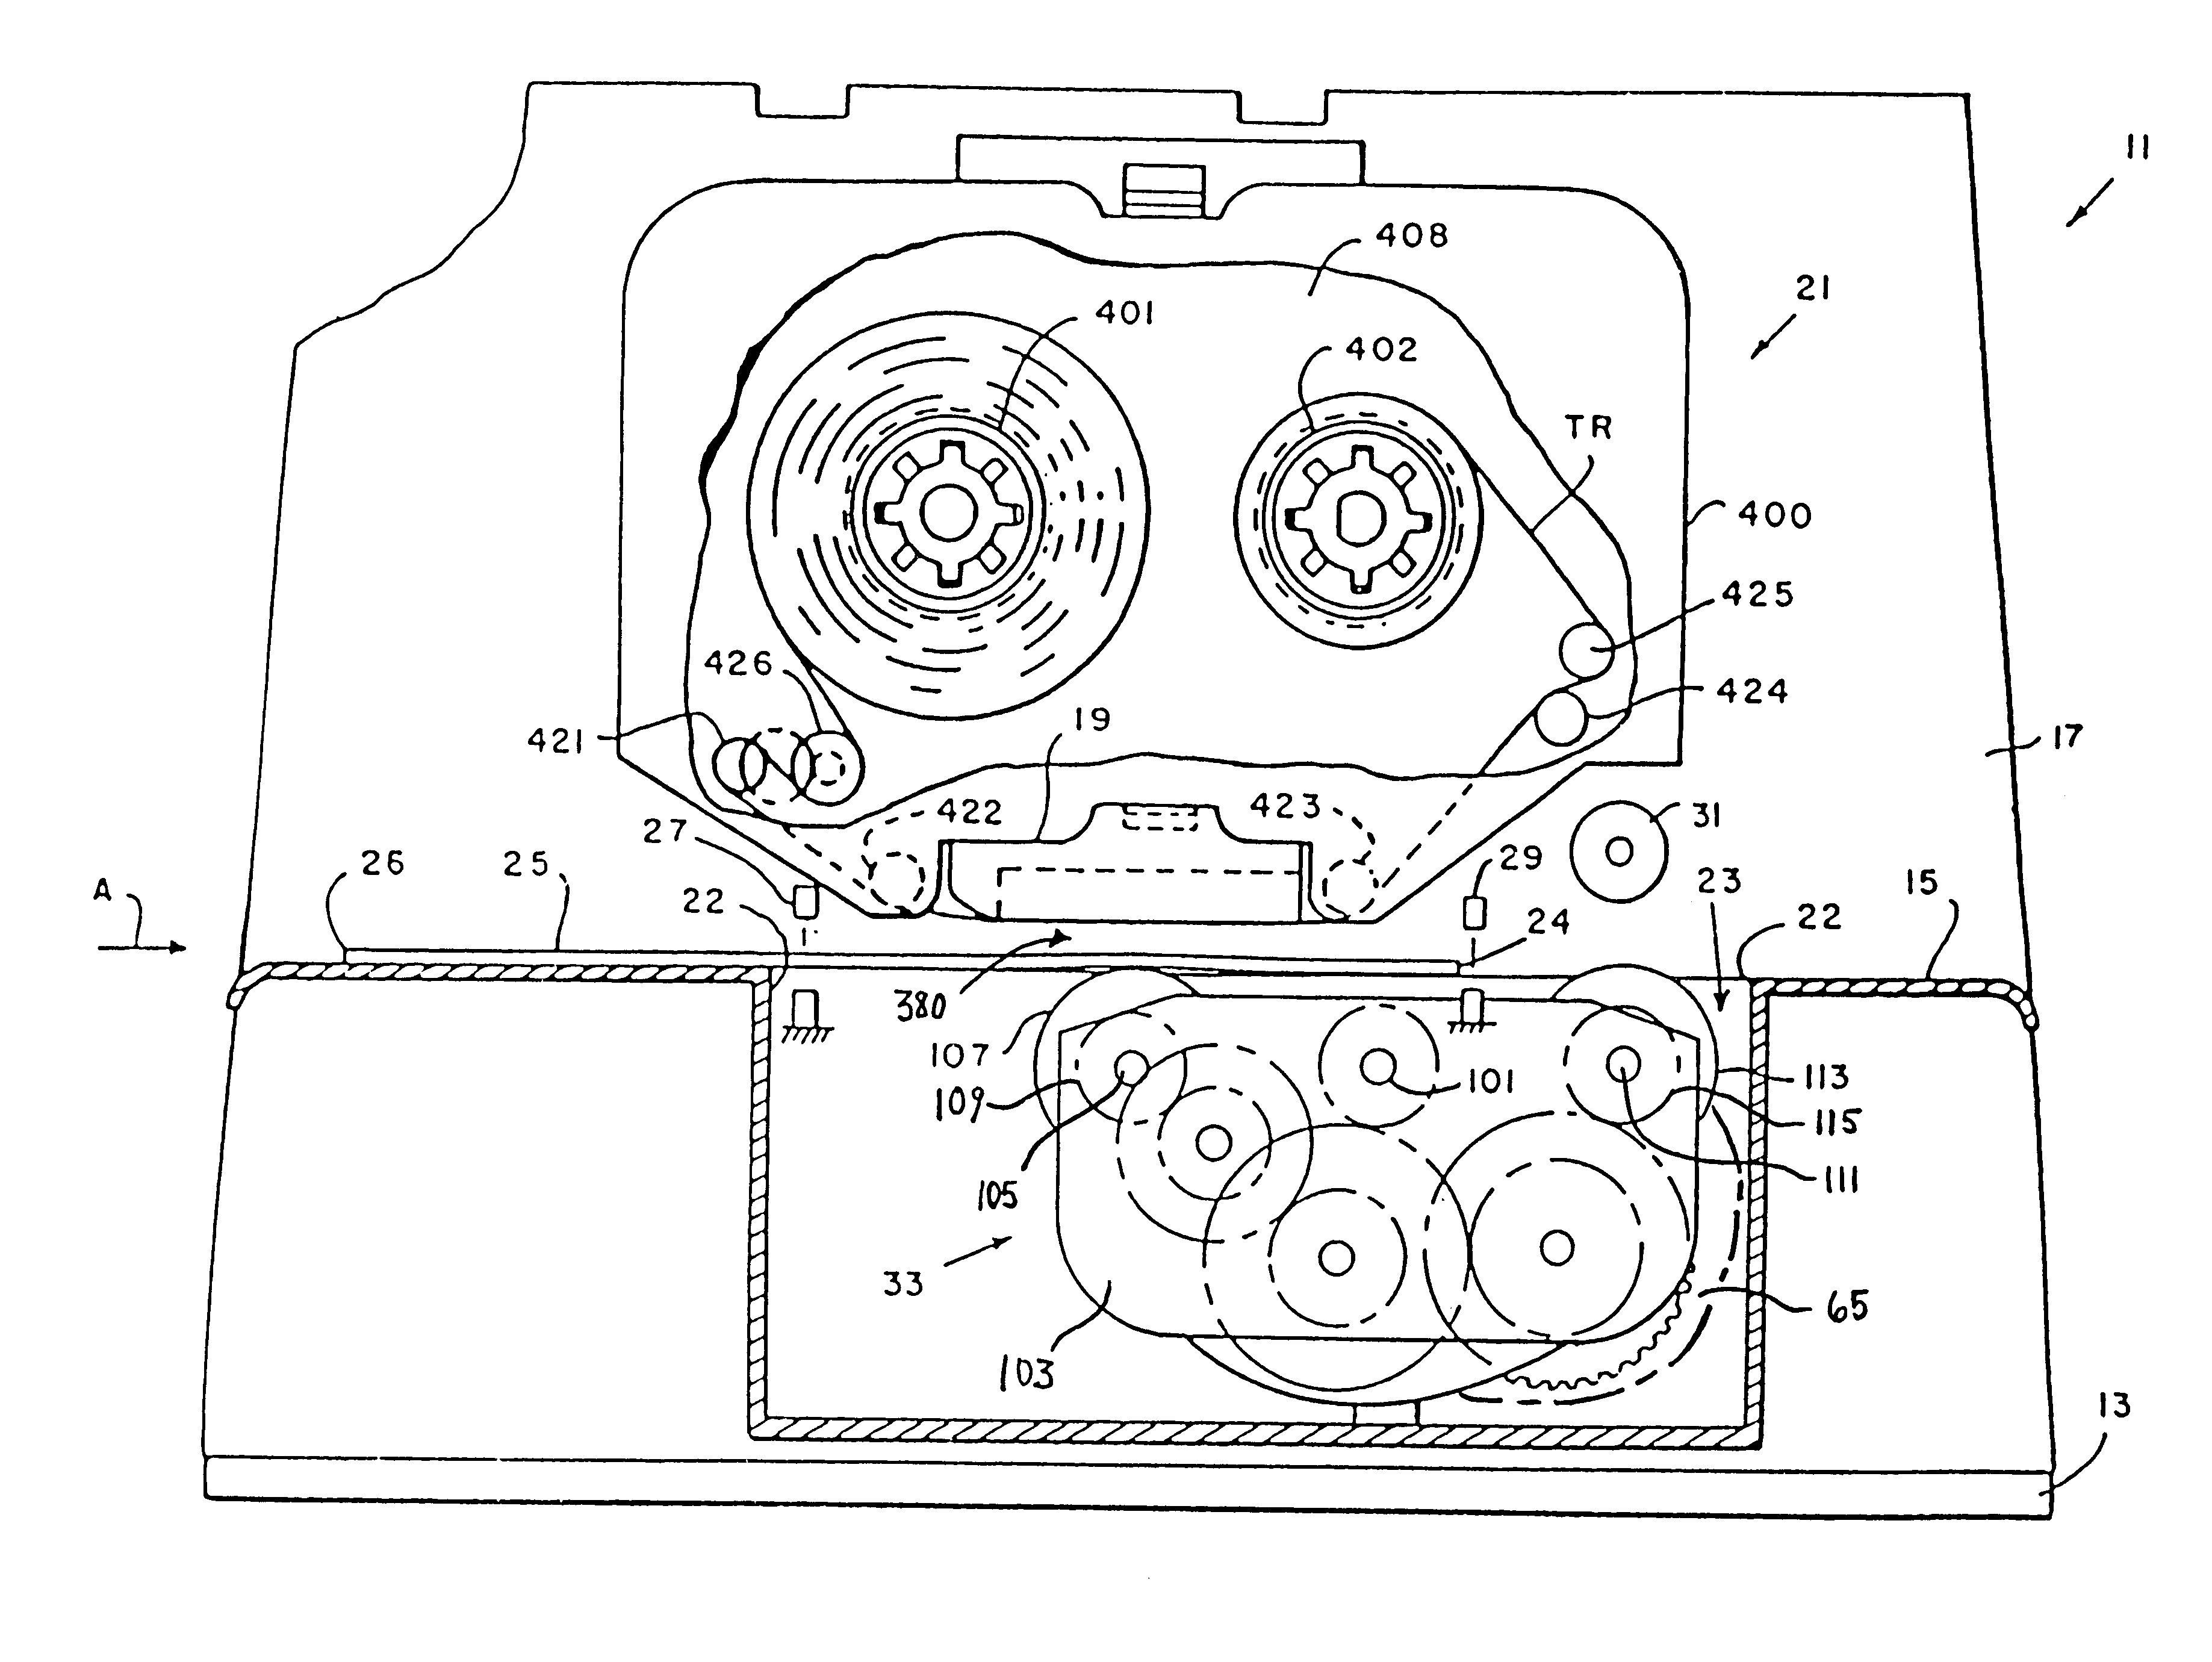 Motion control methodology for a high-speed inserting machine or other mailing apparatus